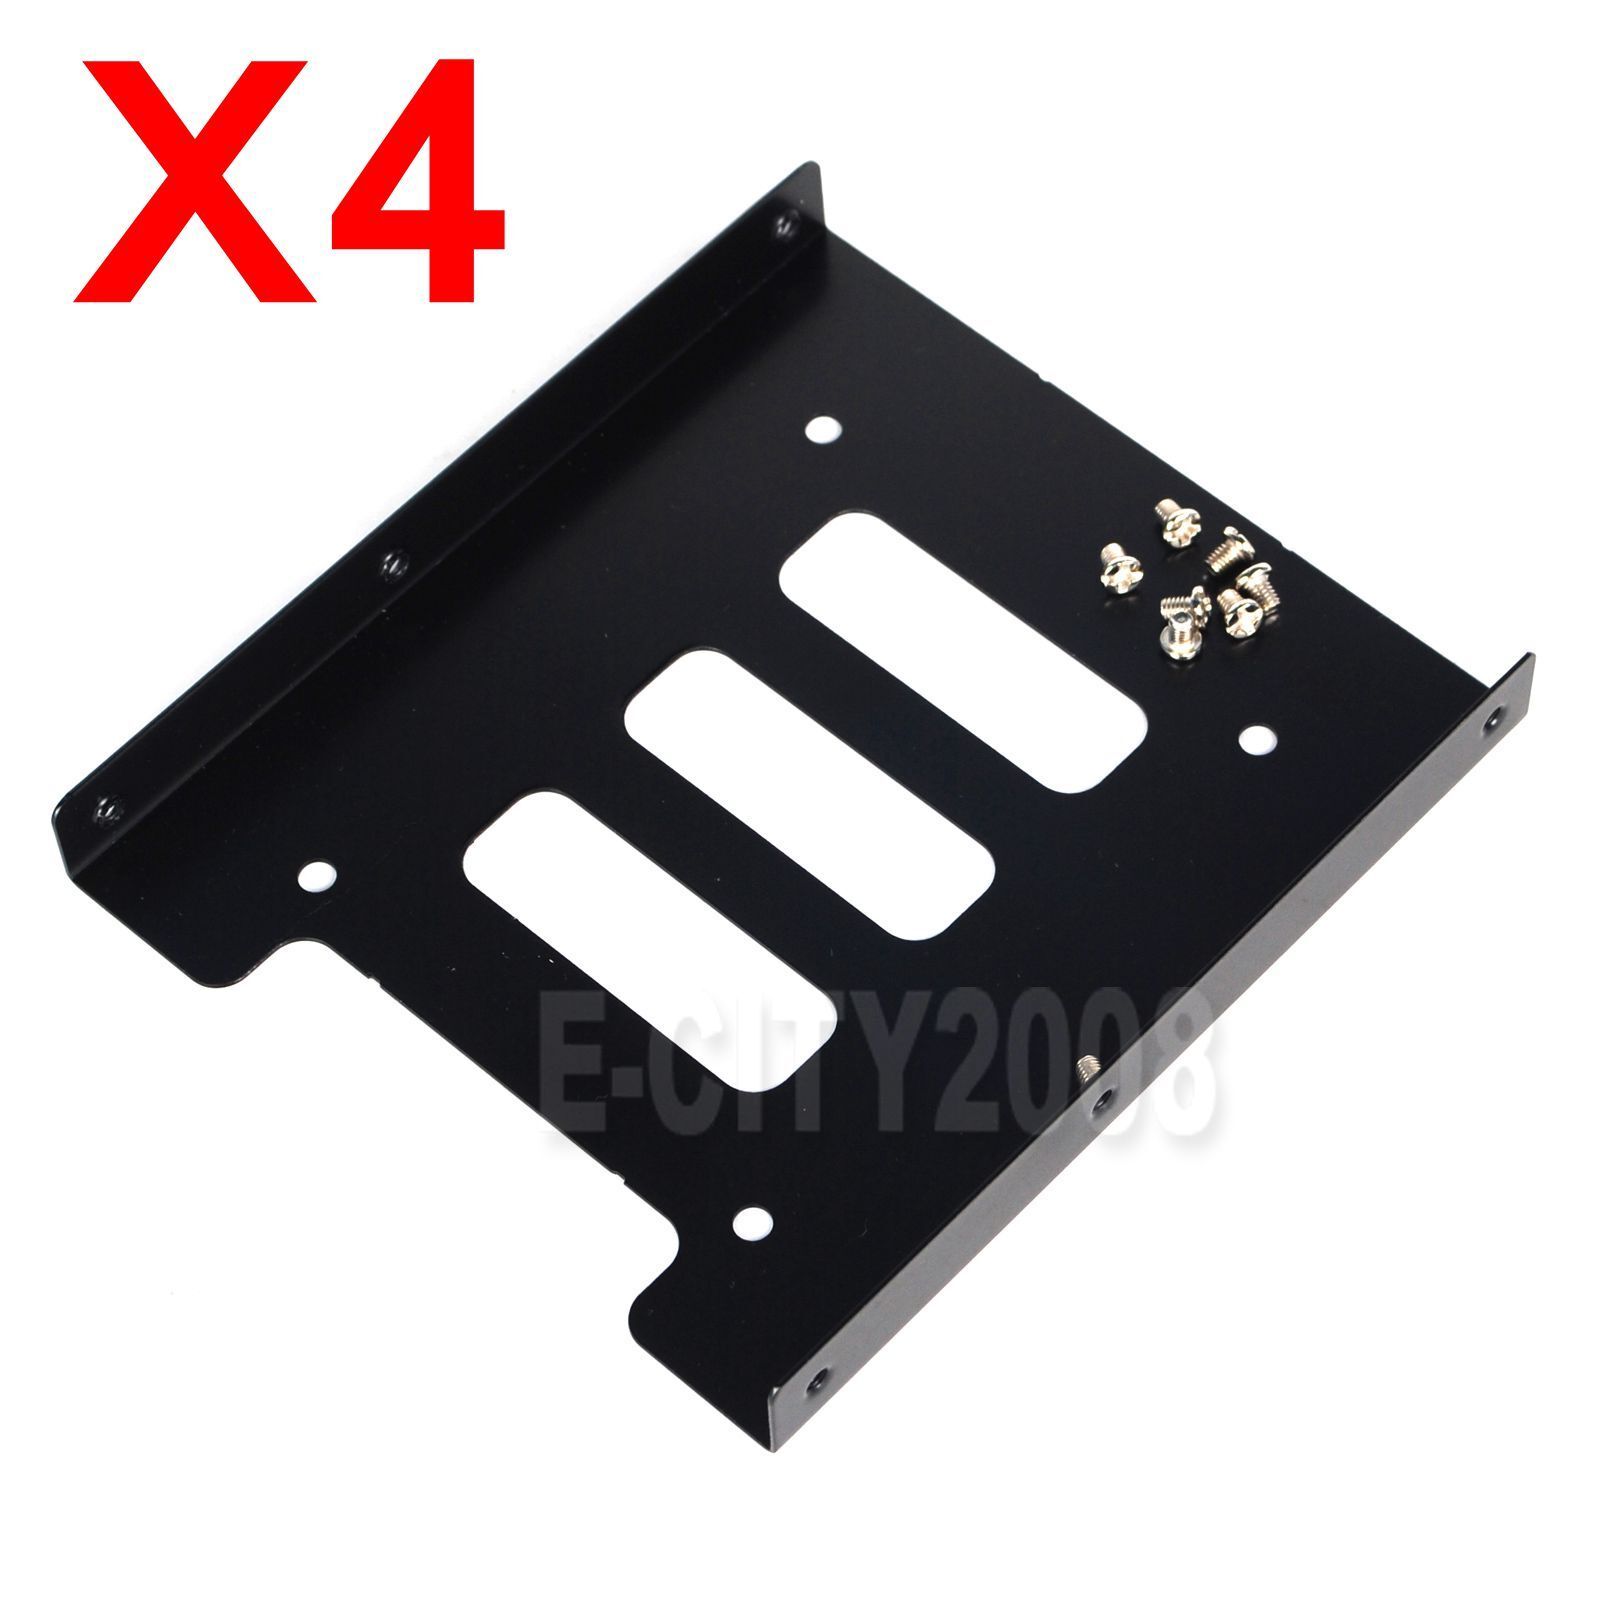 4x 2.5inch HDD SSD to 3.5inch Metal Mounting Adapter Bracket Hard Drive Holder